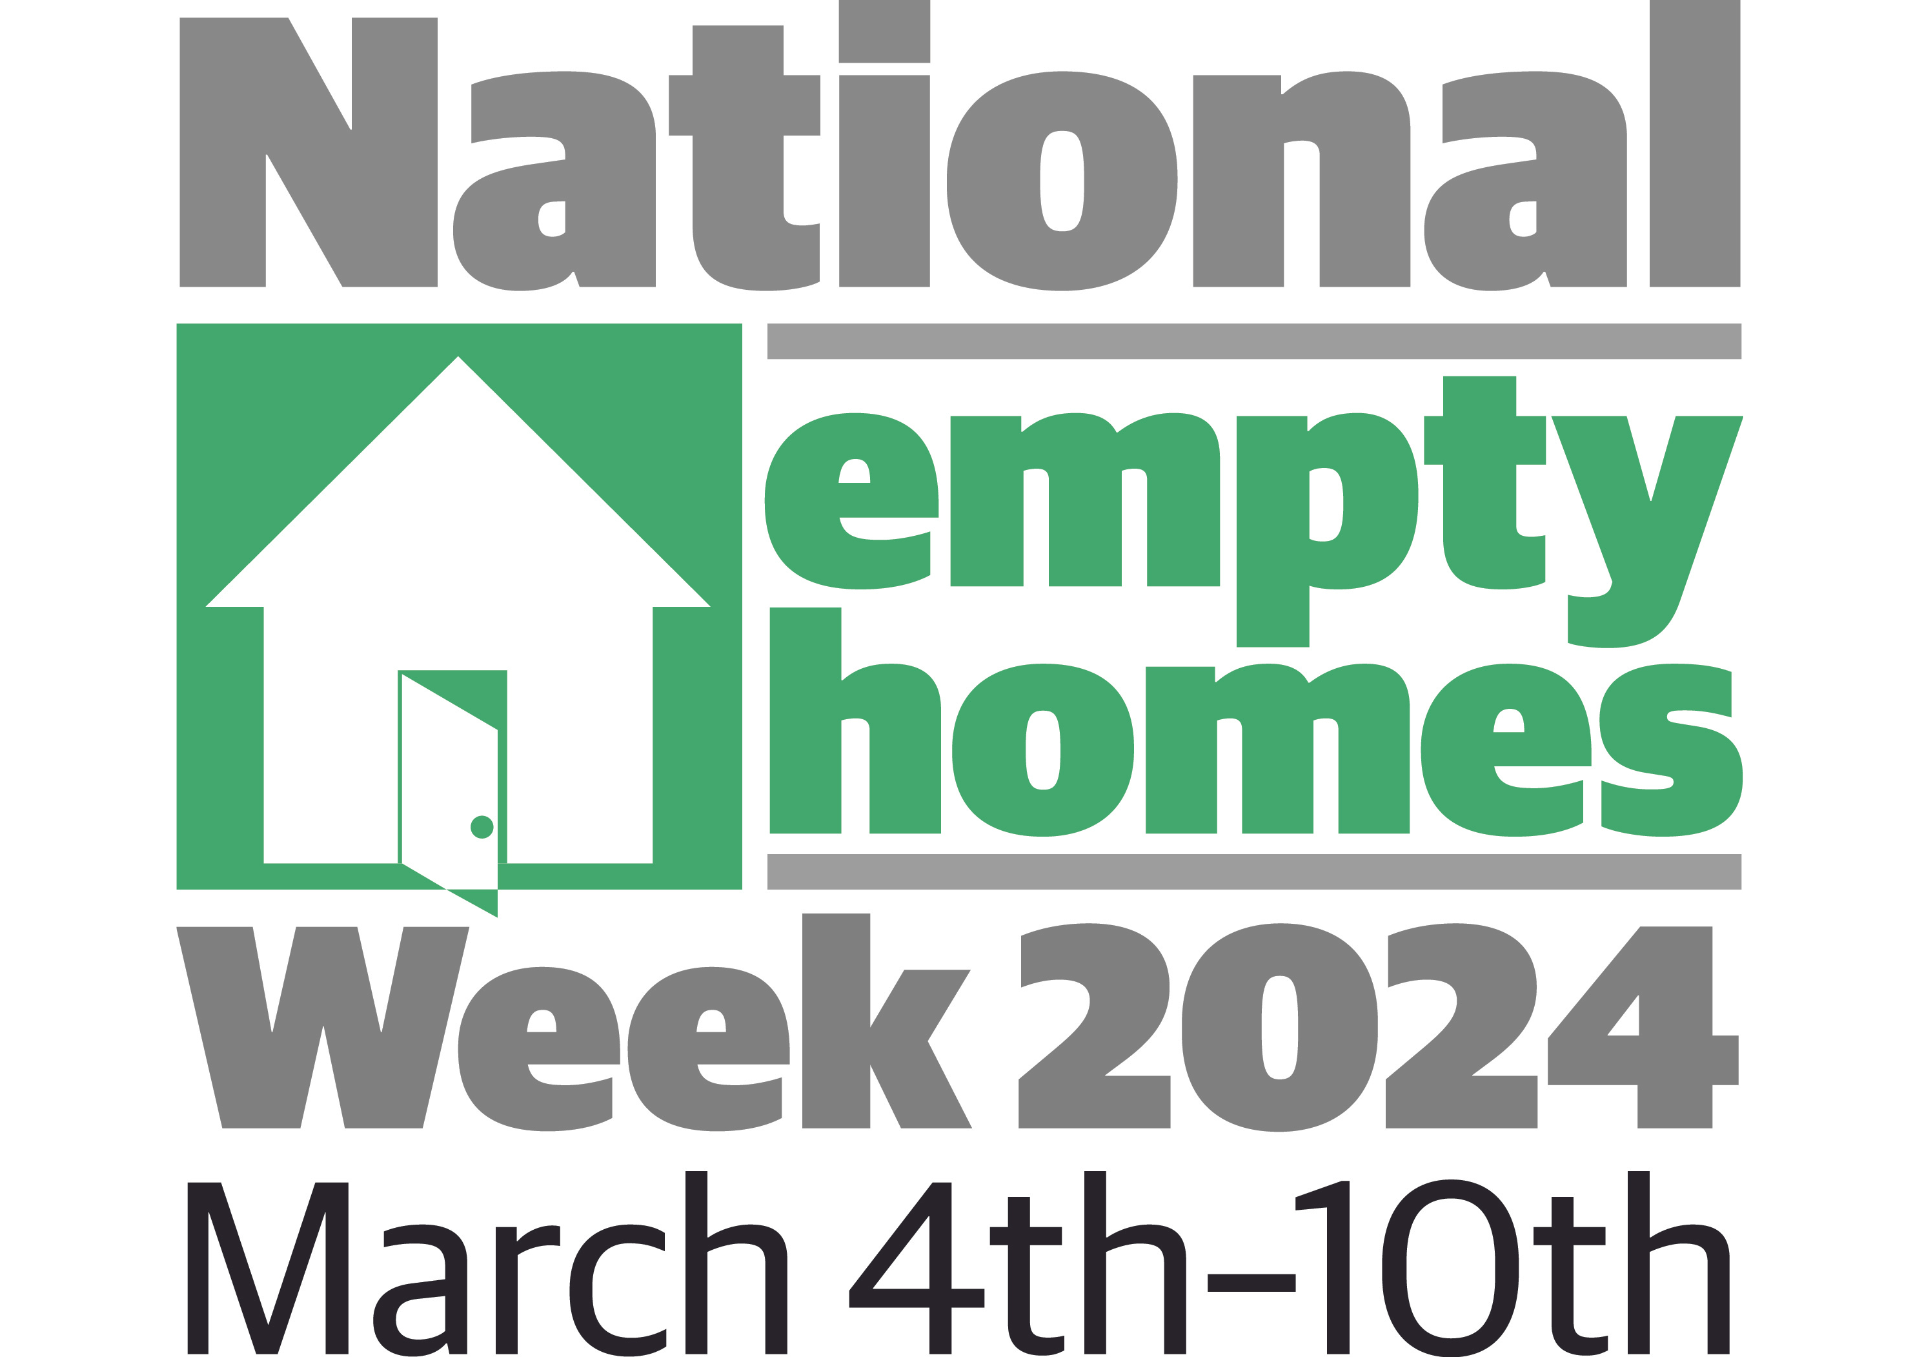 Text about National Empty Homes Week